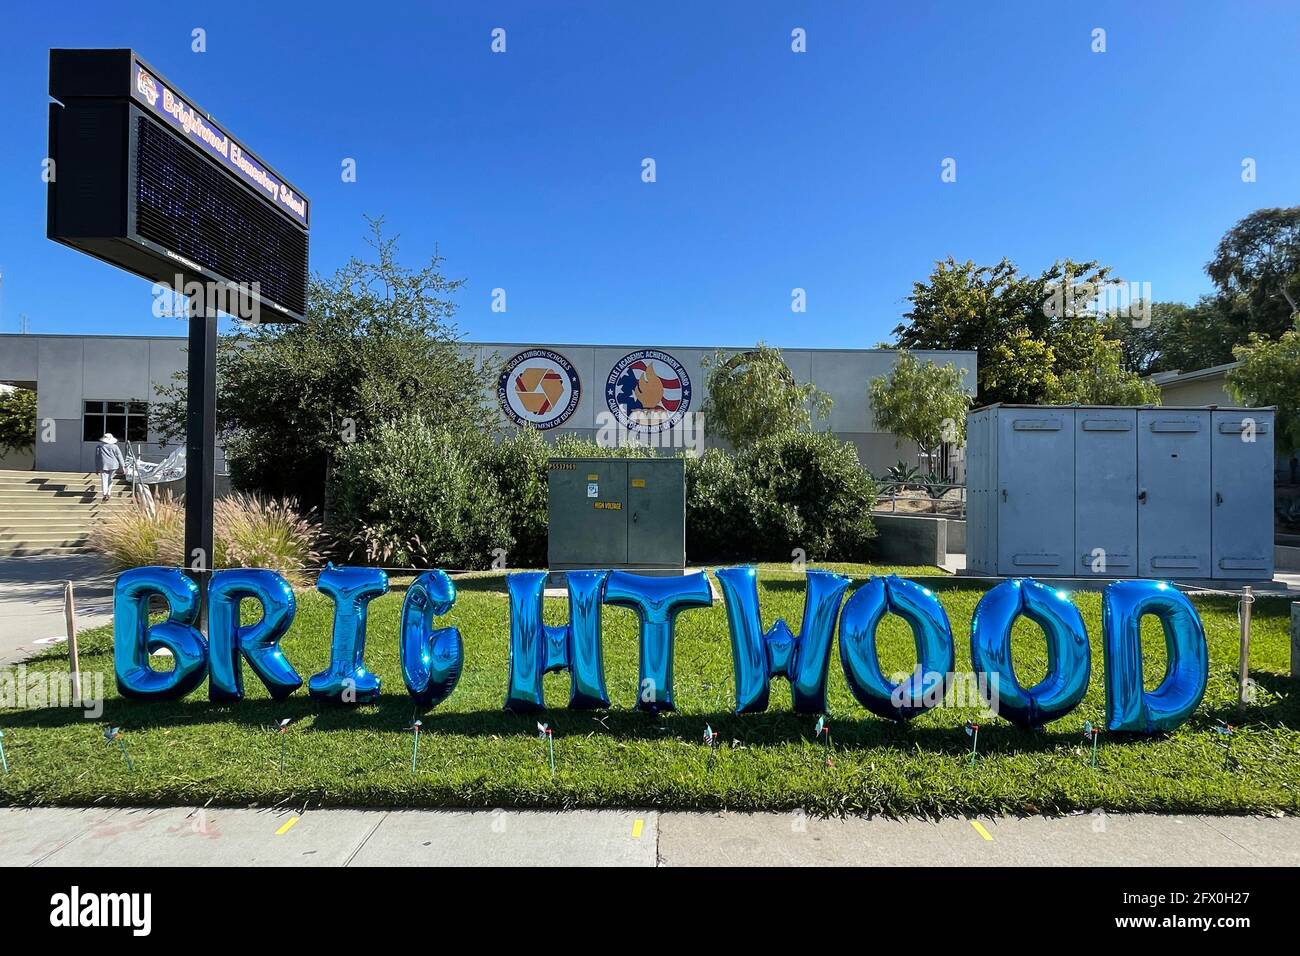 Brightwood Elementary School is seen, Monday, May 21, 2021, in Monterey Park, Calif. Stock Photo